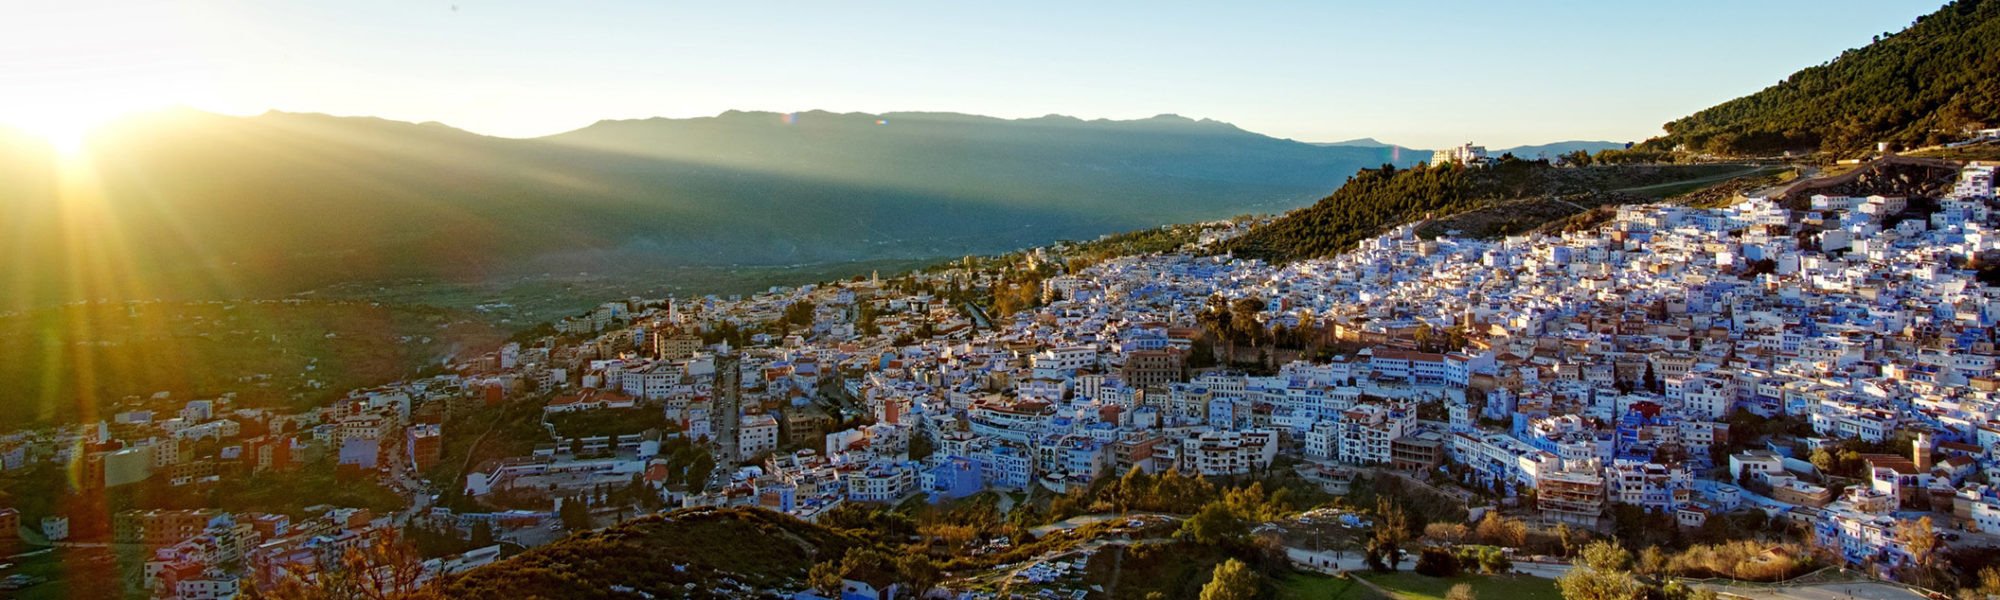 A panorama cityscape view of the blue city and Rif Mountains at sunset in Chefchaouen, Morocco with Jaya Travel & Tours.